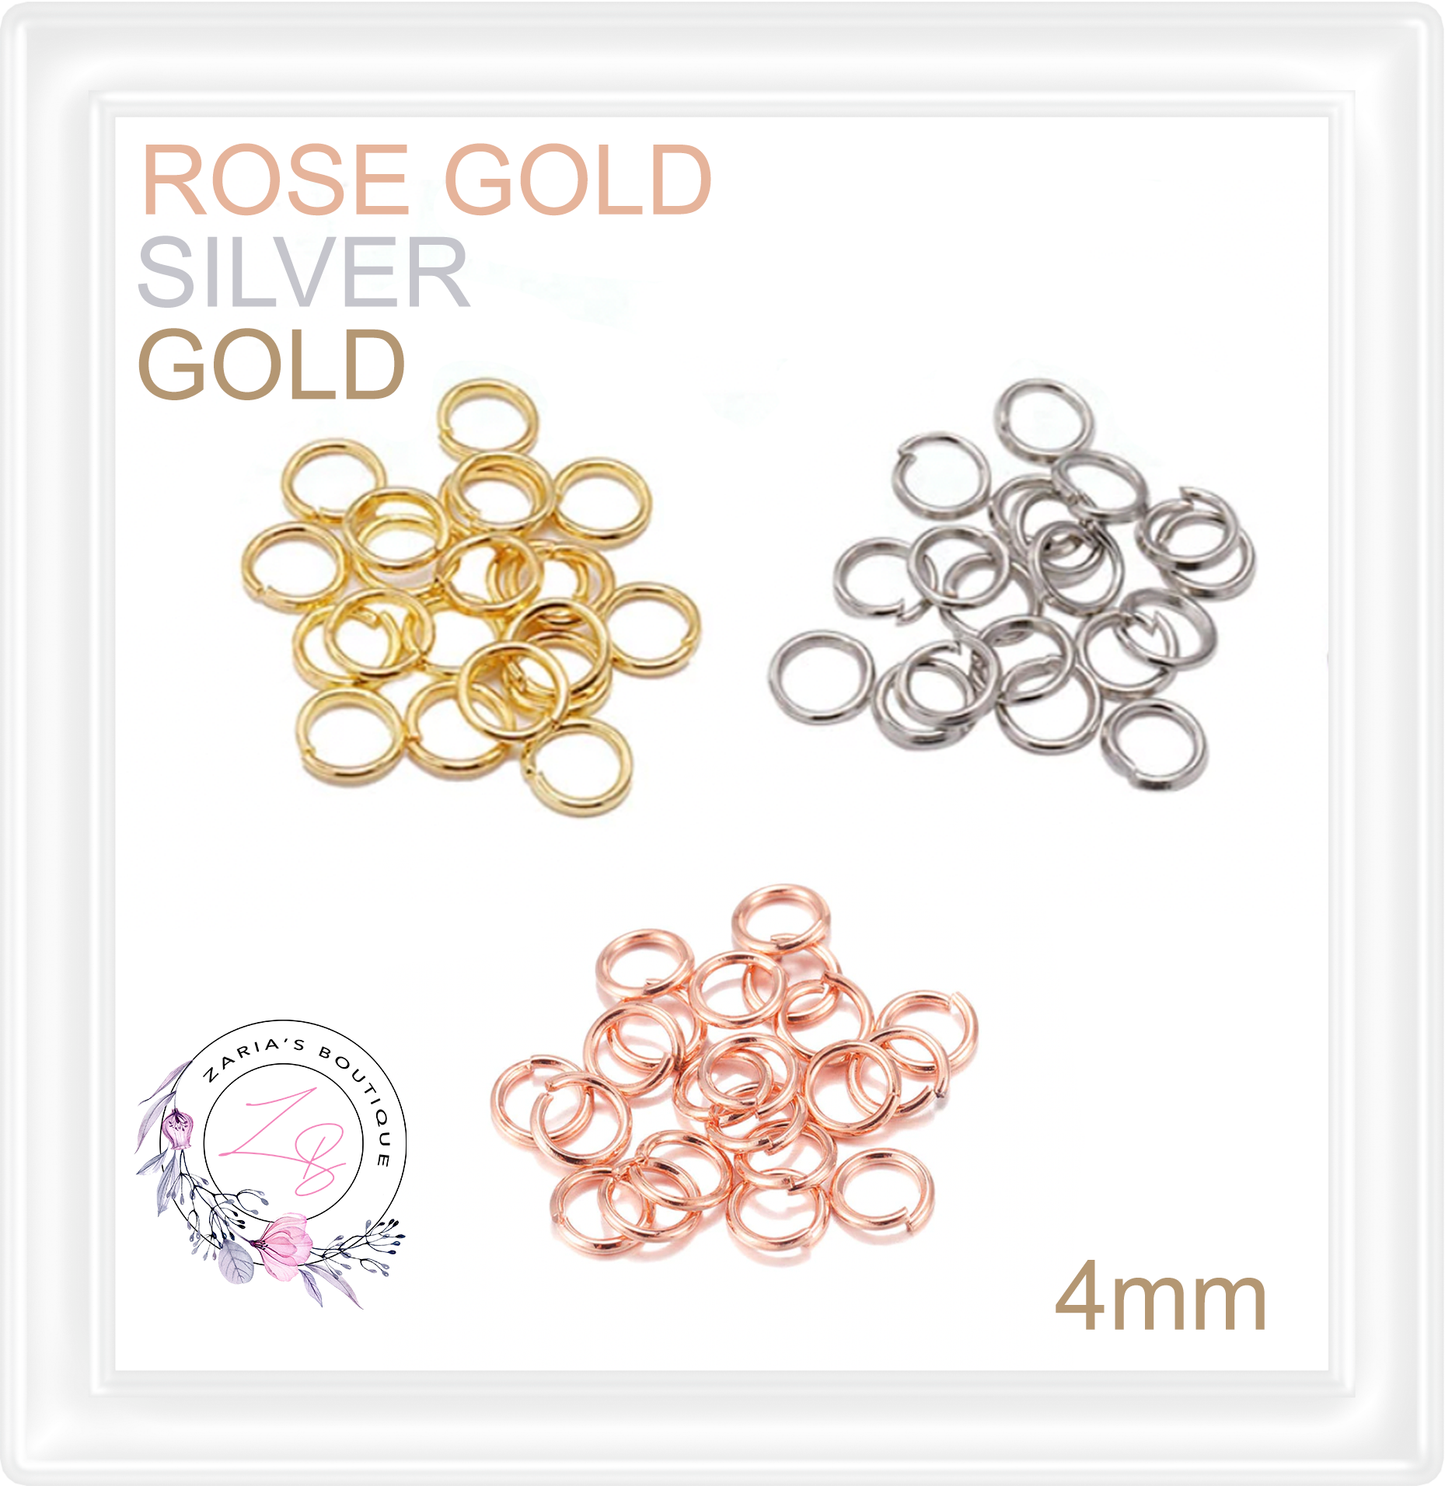 ⋅ Open Jump Rings ⋅ Silver Rose Gold or Gold ⋅ 4mm